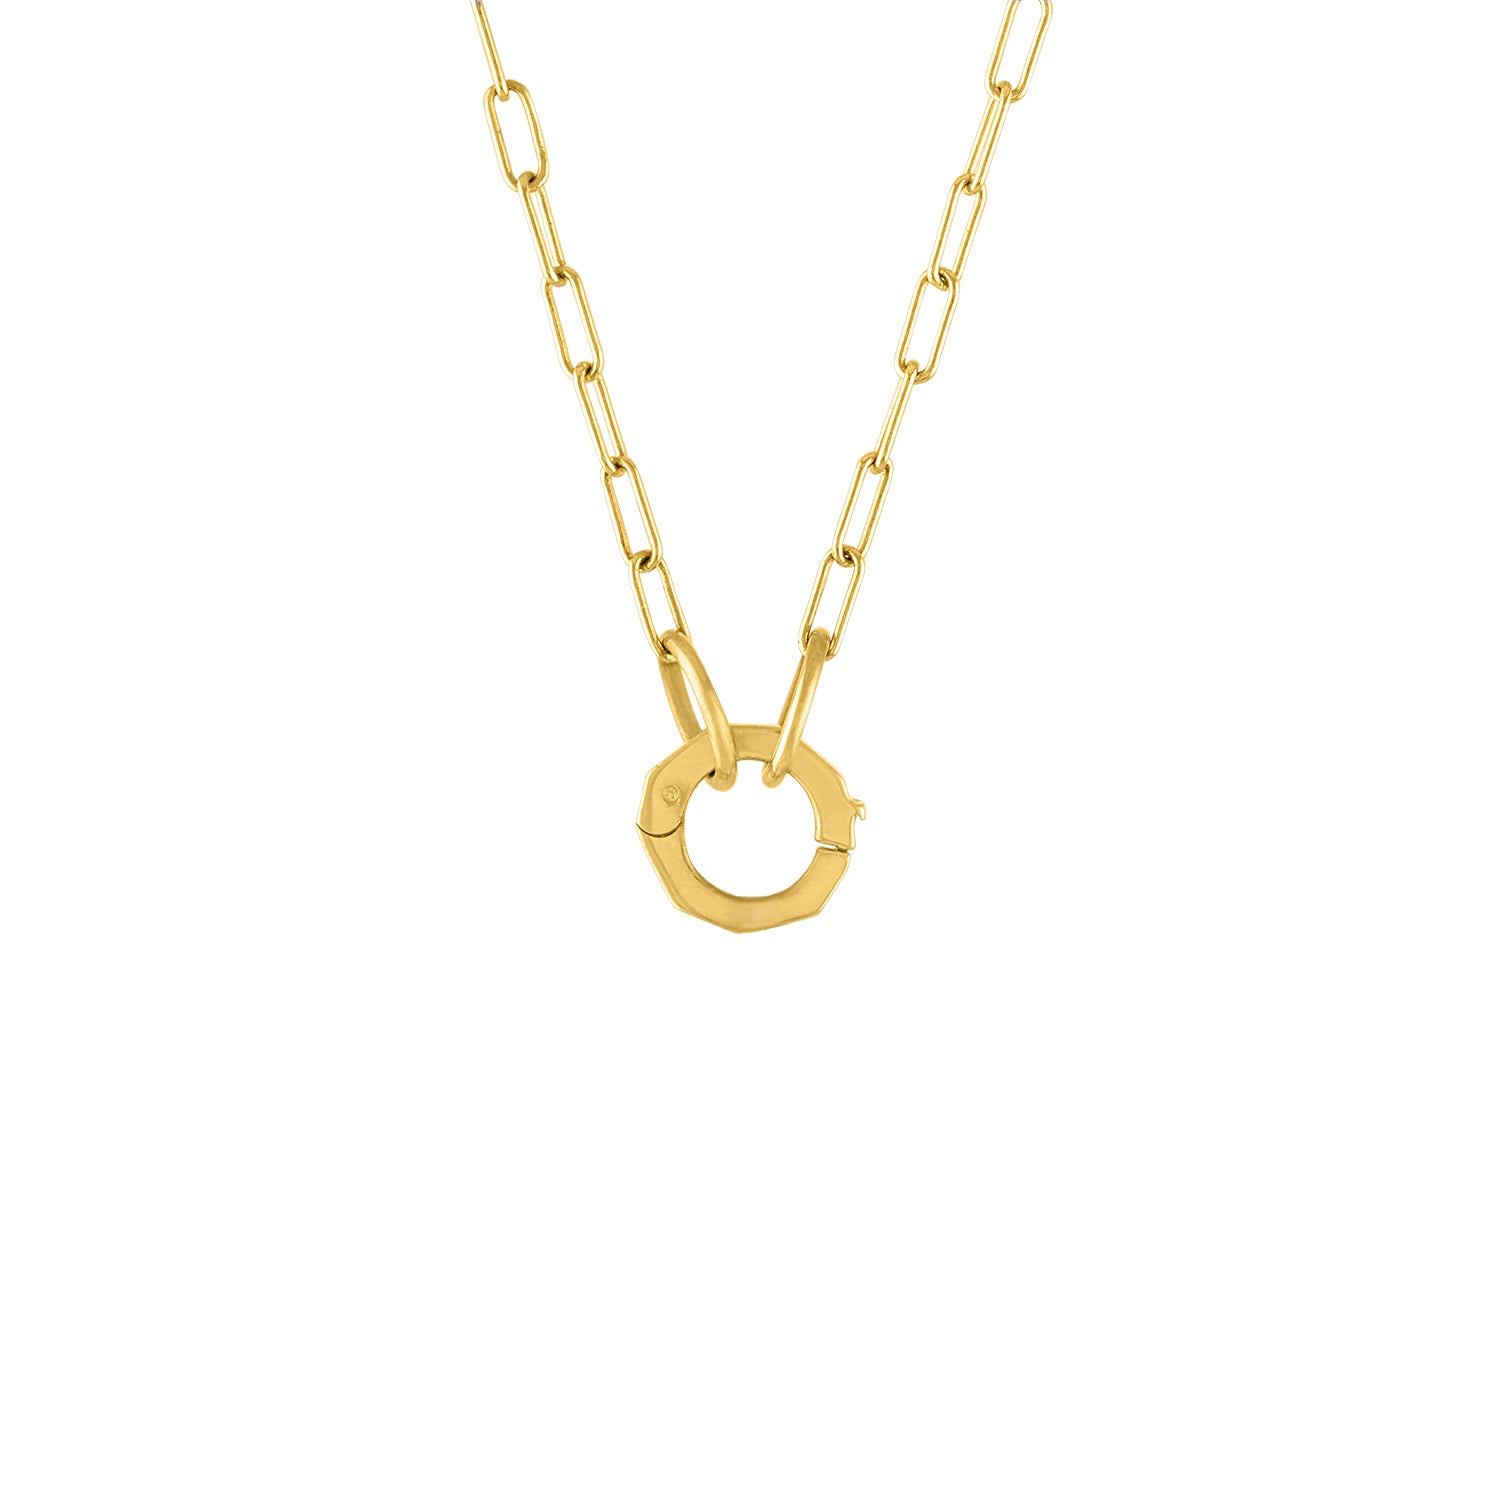 Open End Chain with Charm Holder in 14 Karat Gold